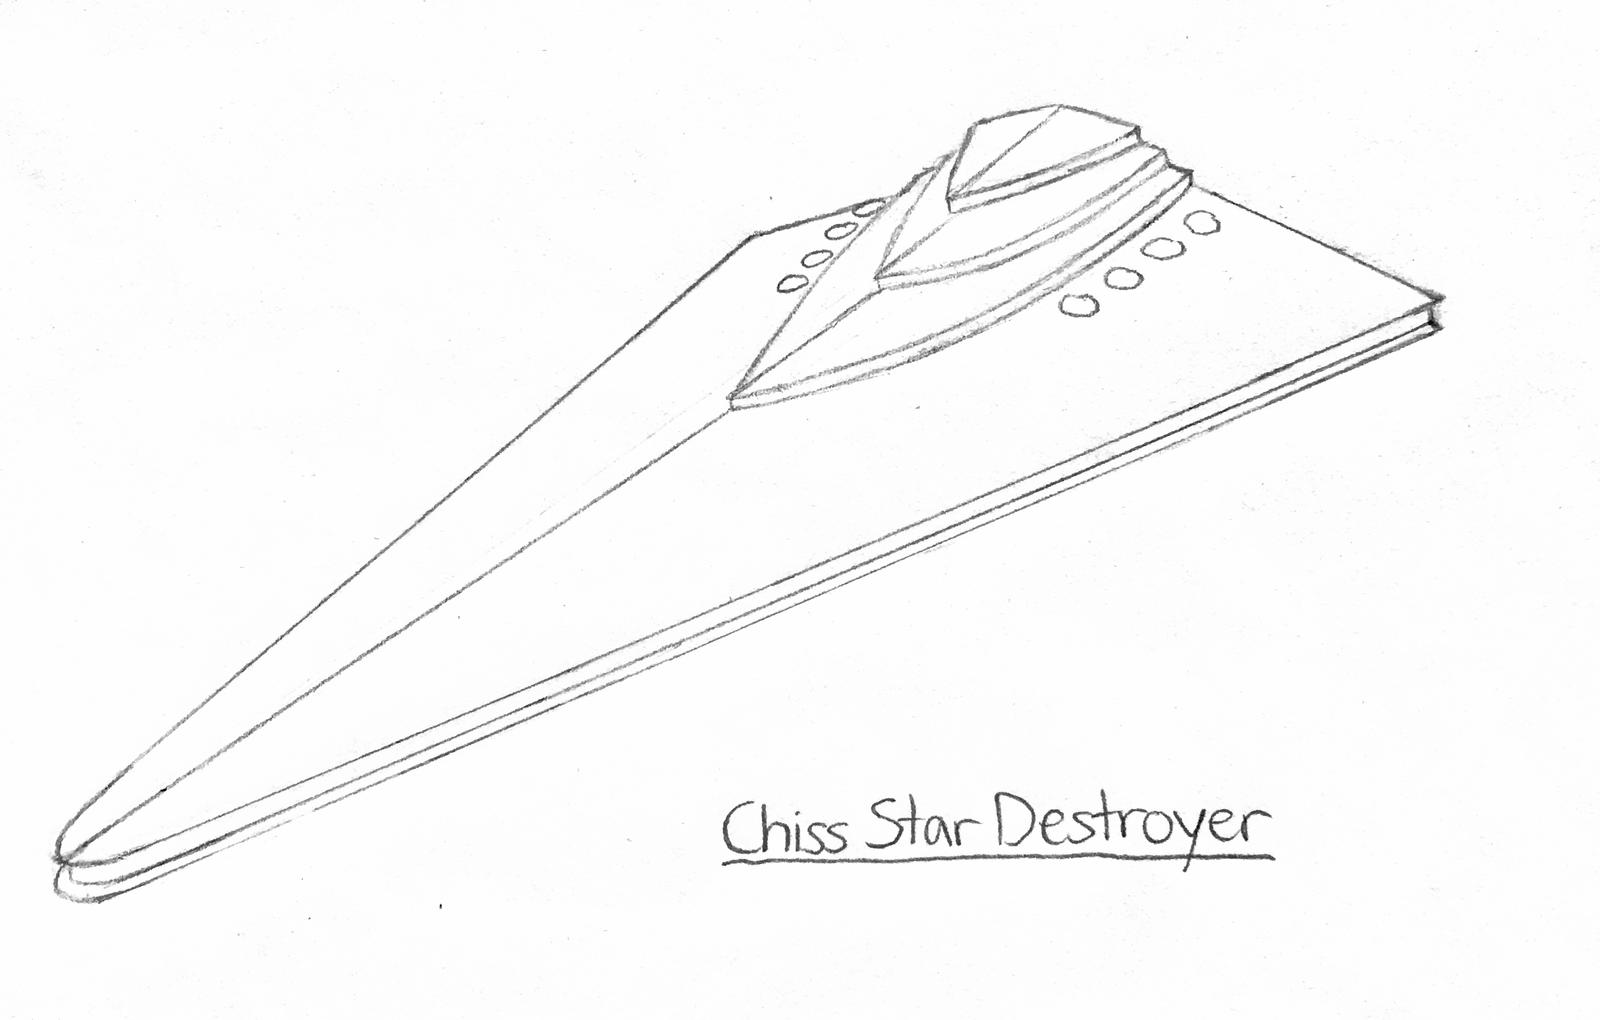 Chiss star destroyer by aidmoore on